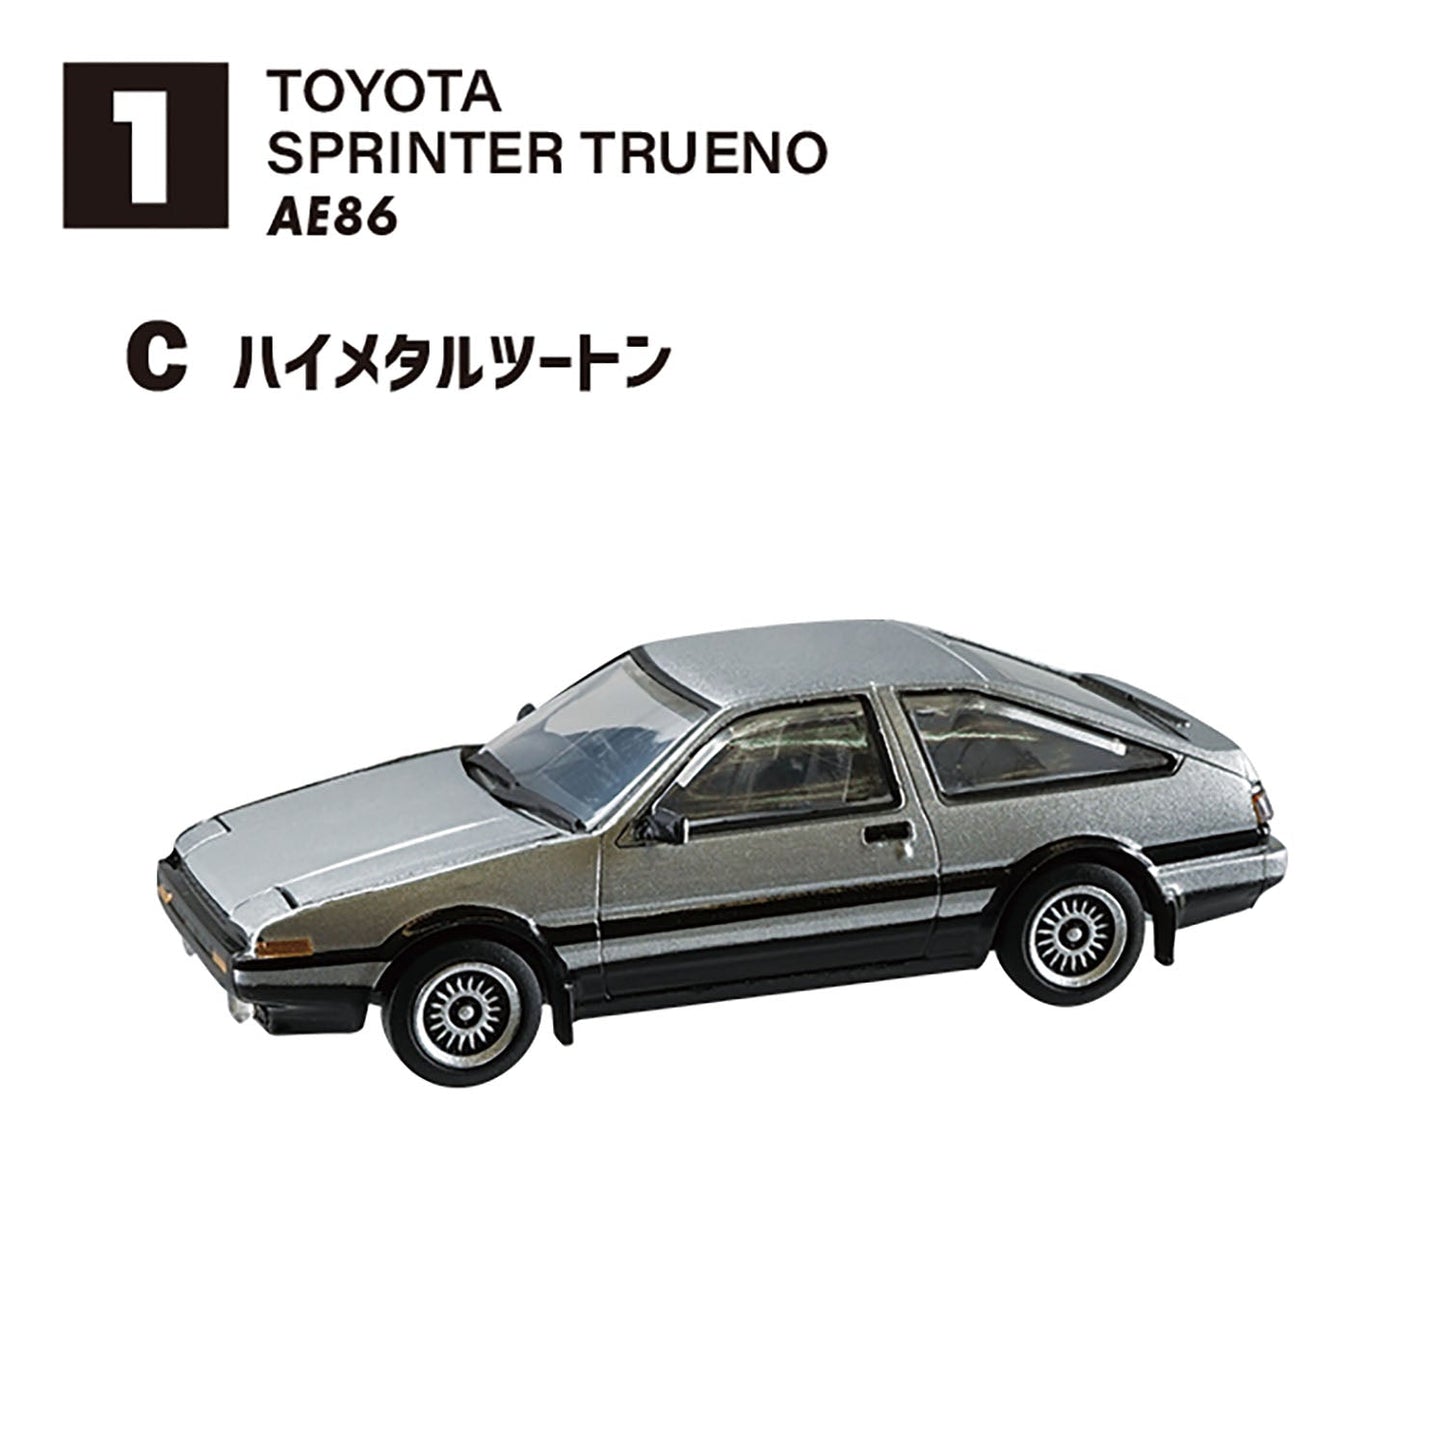 F-Toys - 1/64 Japanese Classic Car Selection 15 86 Collection: 1 Random Pull - Good Game Anime